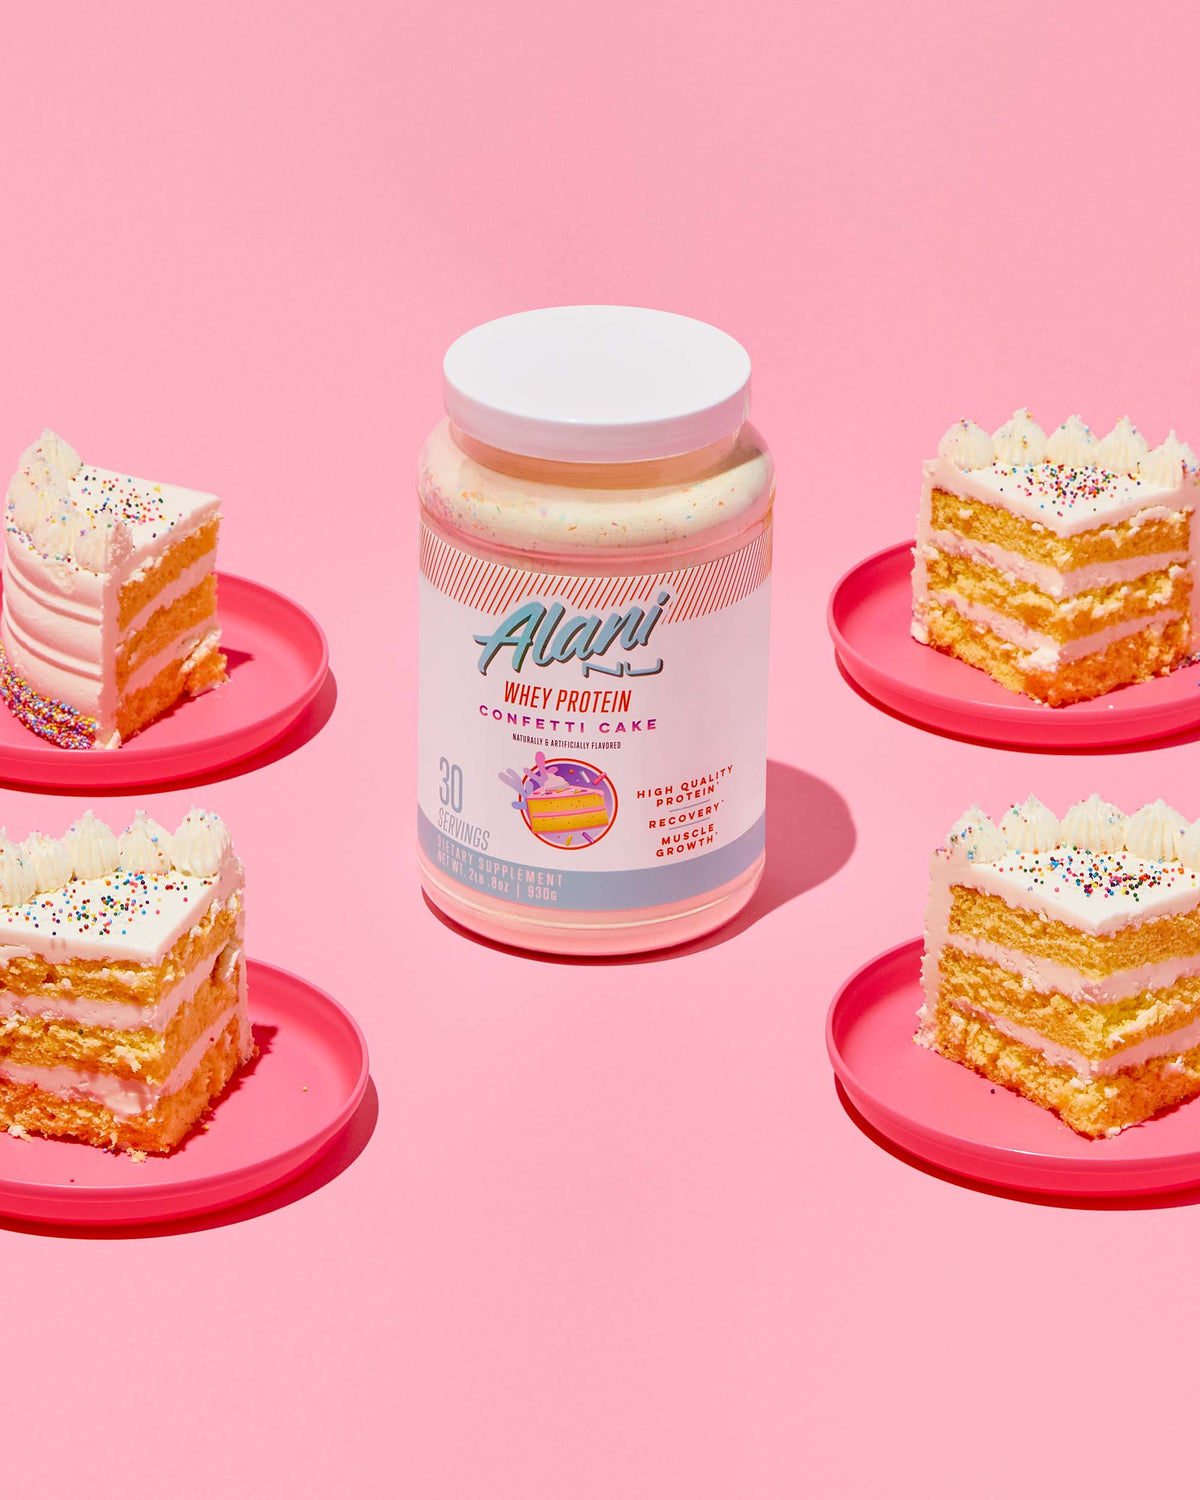 A pink plate topped with a piece of Alani Nu Cake next to a container of Whey Protein - Confetti Cake.